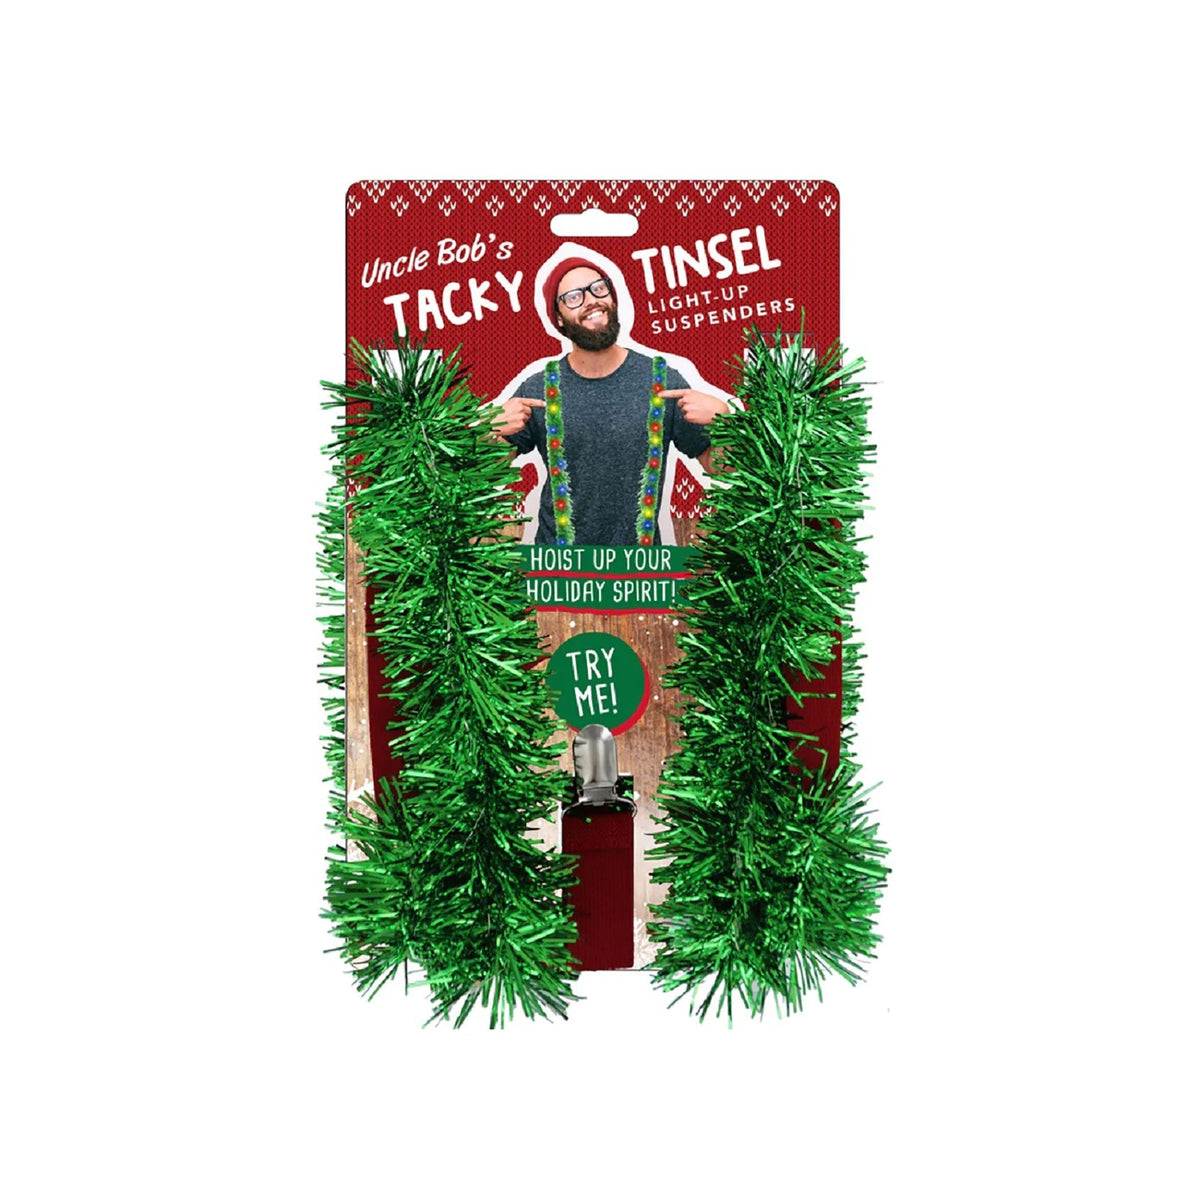 DM MERCHANDISING INC Christmas Tacky Tinsel Light-up Suspenders, 1 Count